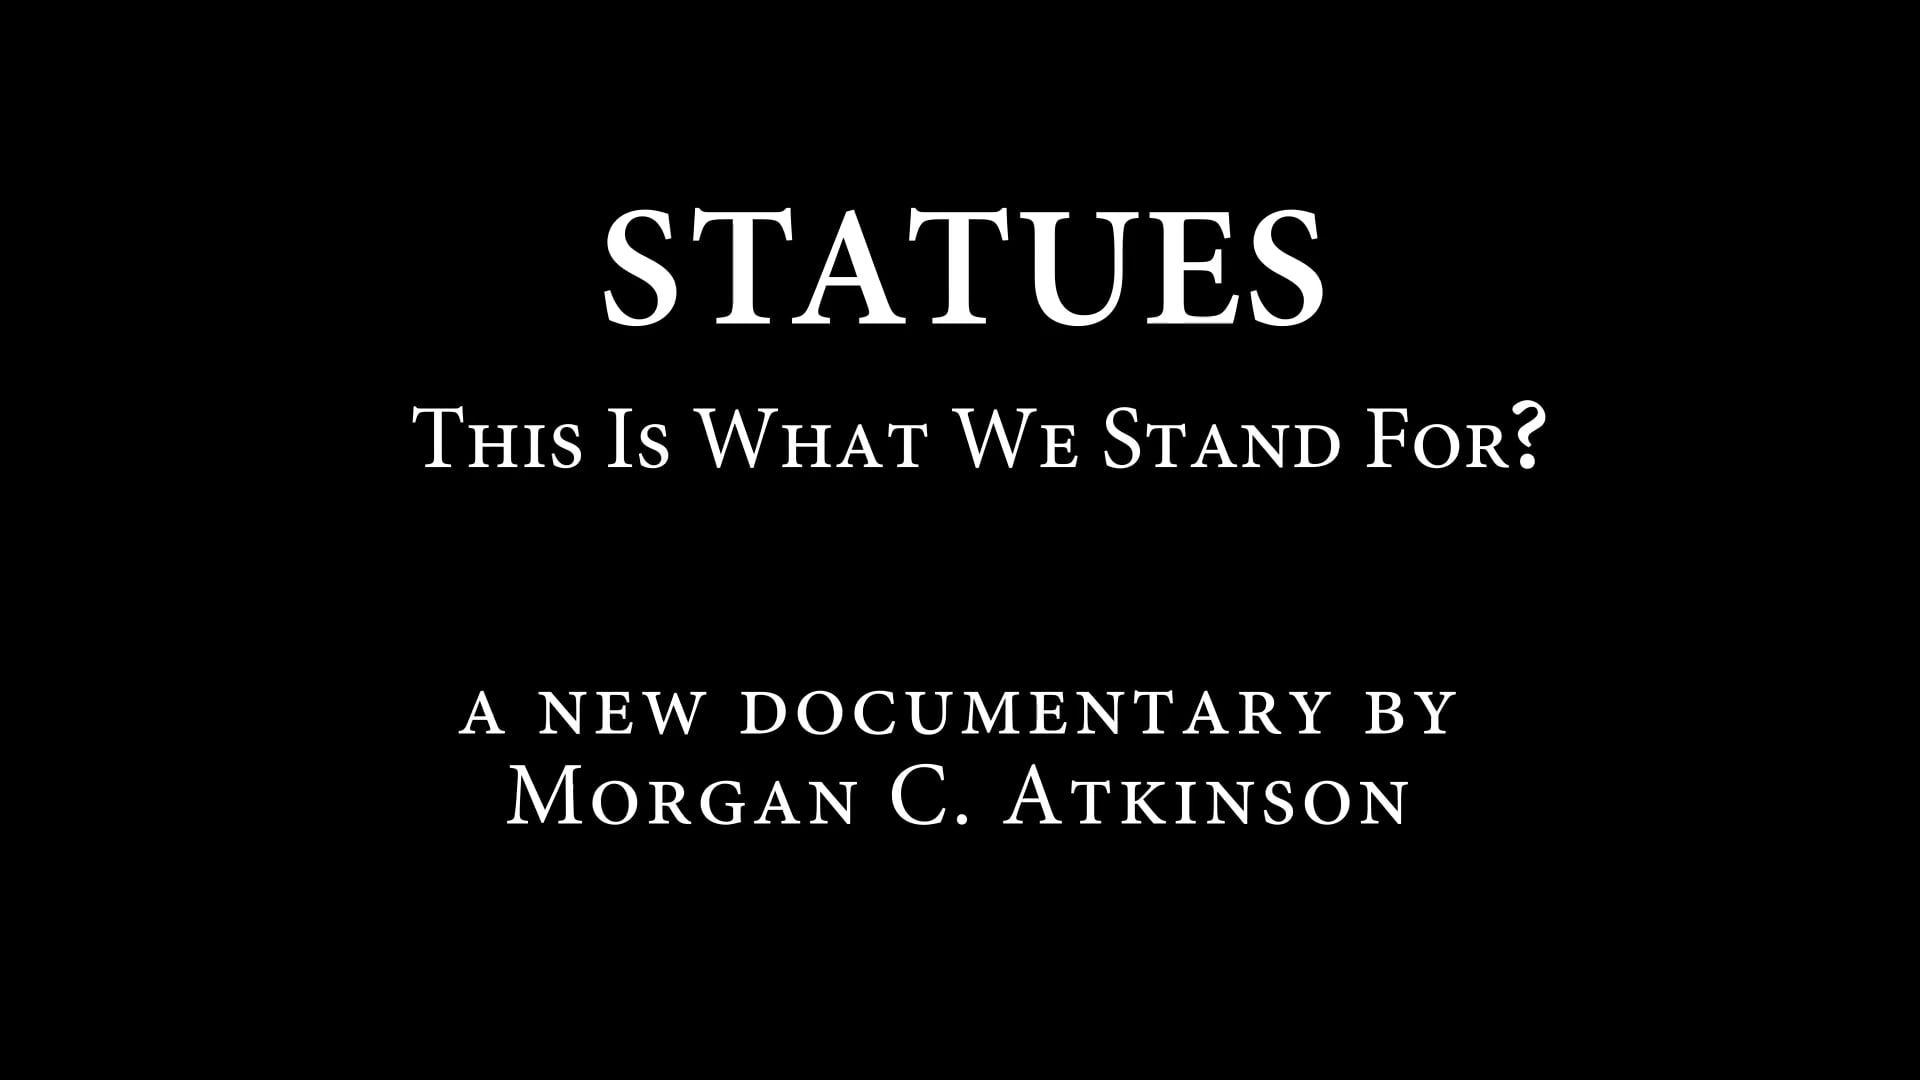 Trailer - STATUES, This is What We Stand For?